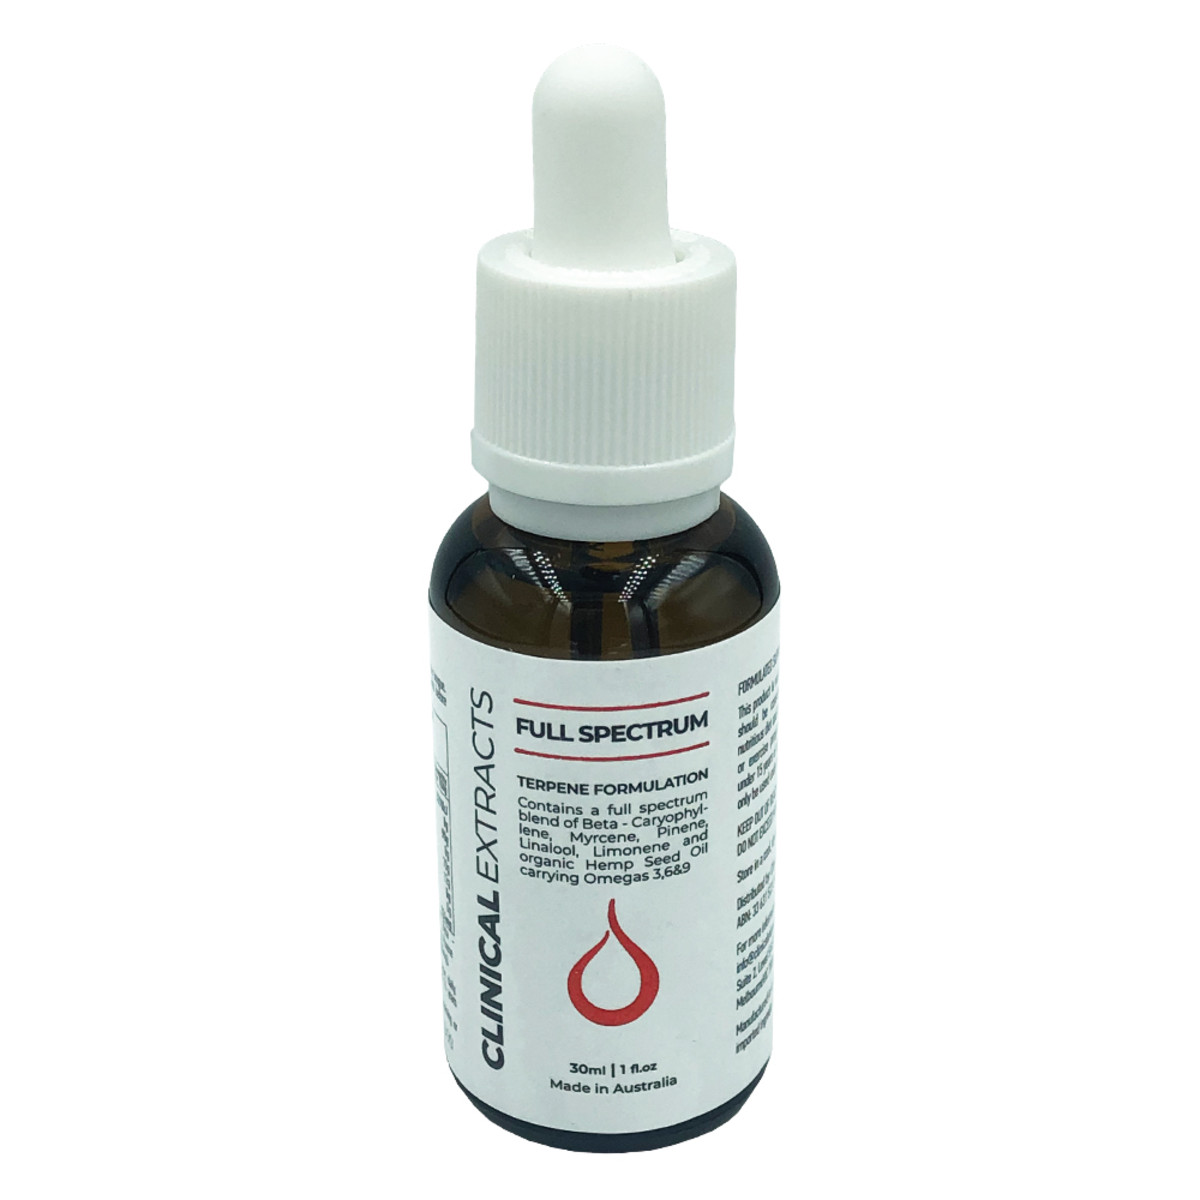 CLINICAL EXTRACTS - Terpene Formulation Full Spectrum 30ml